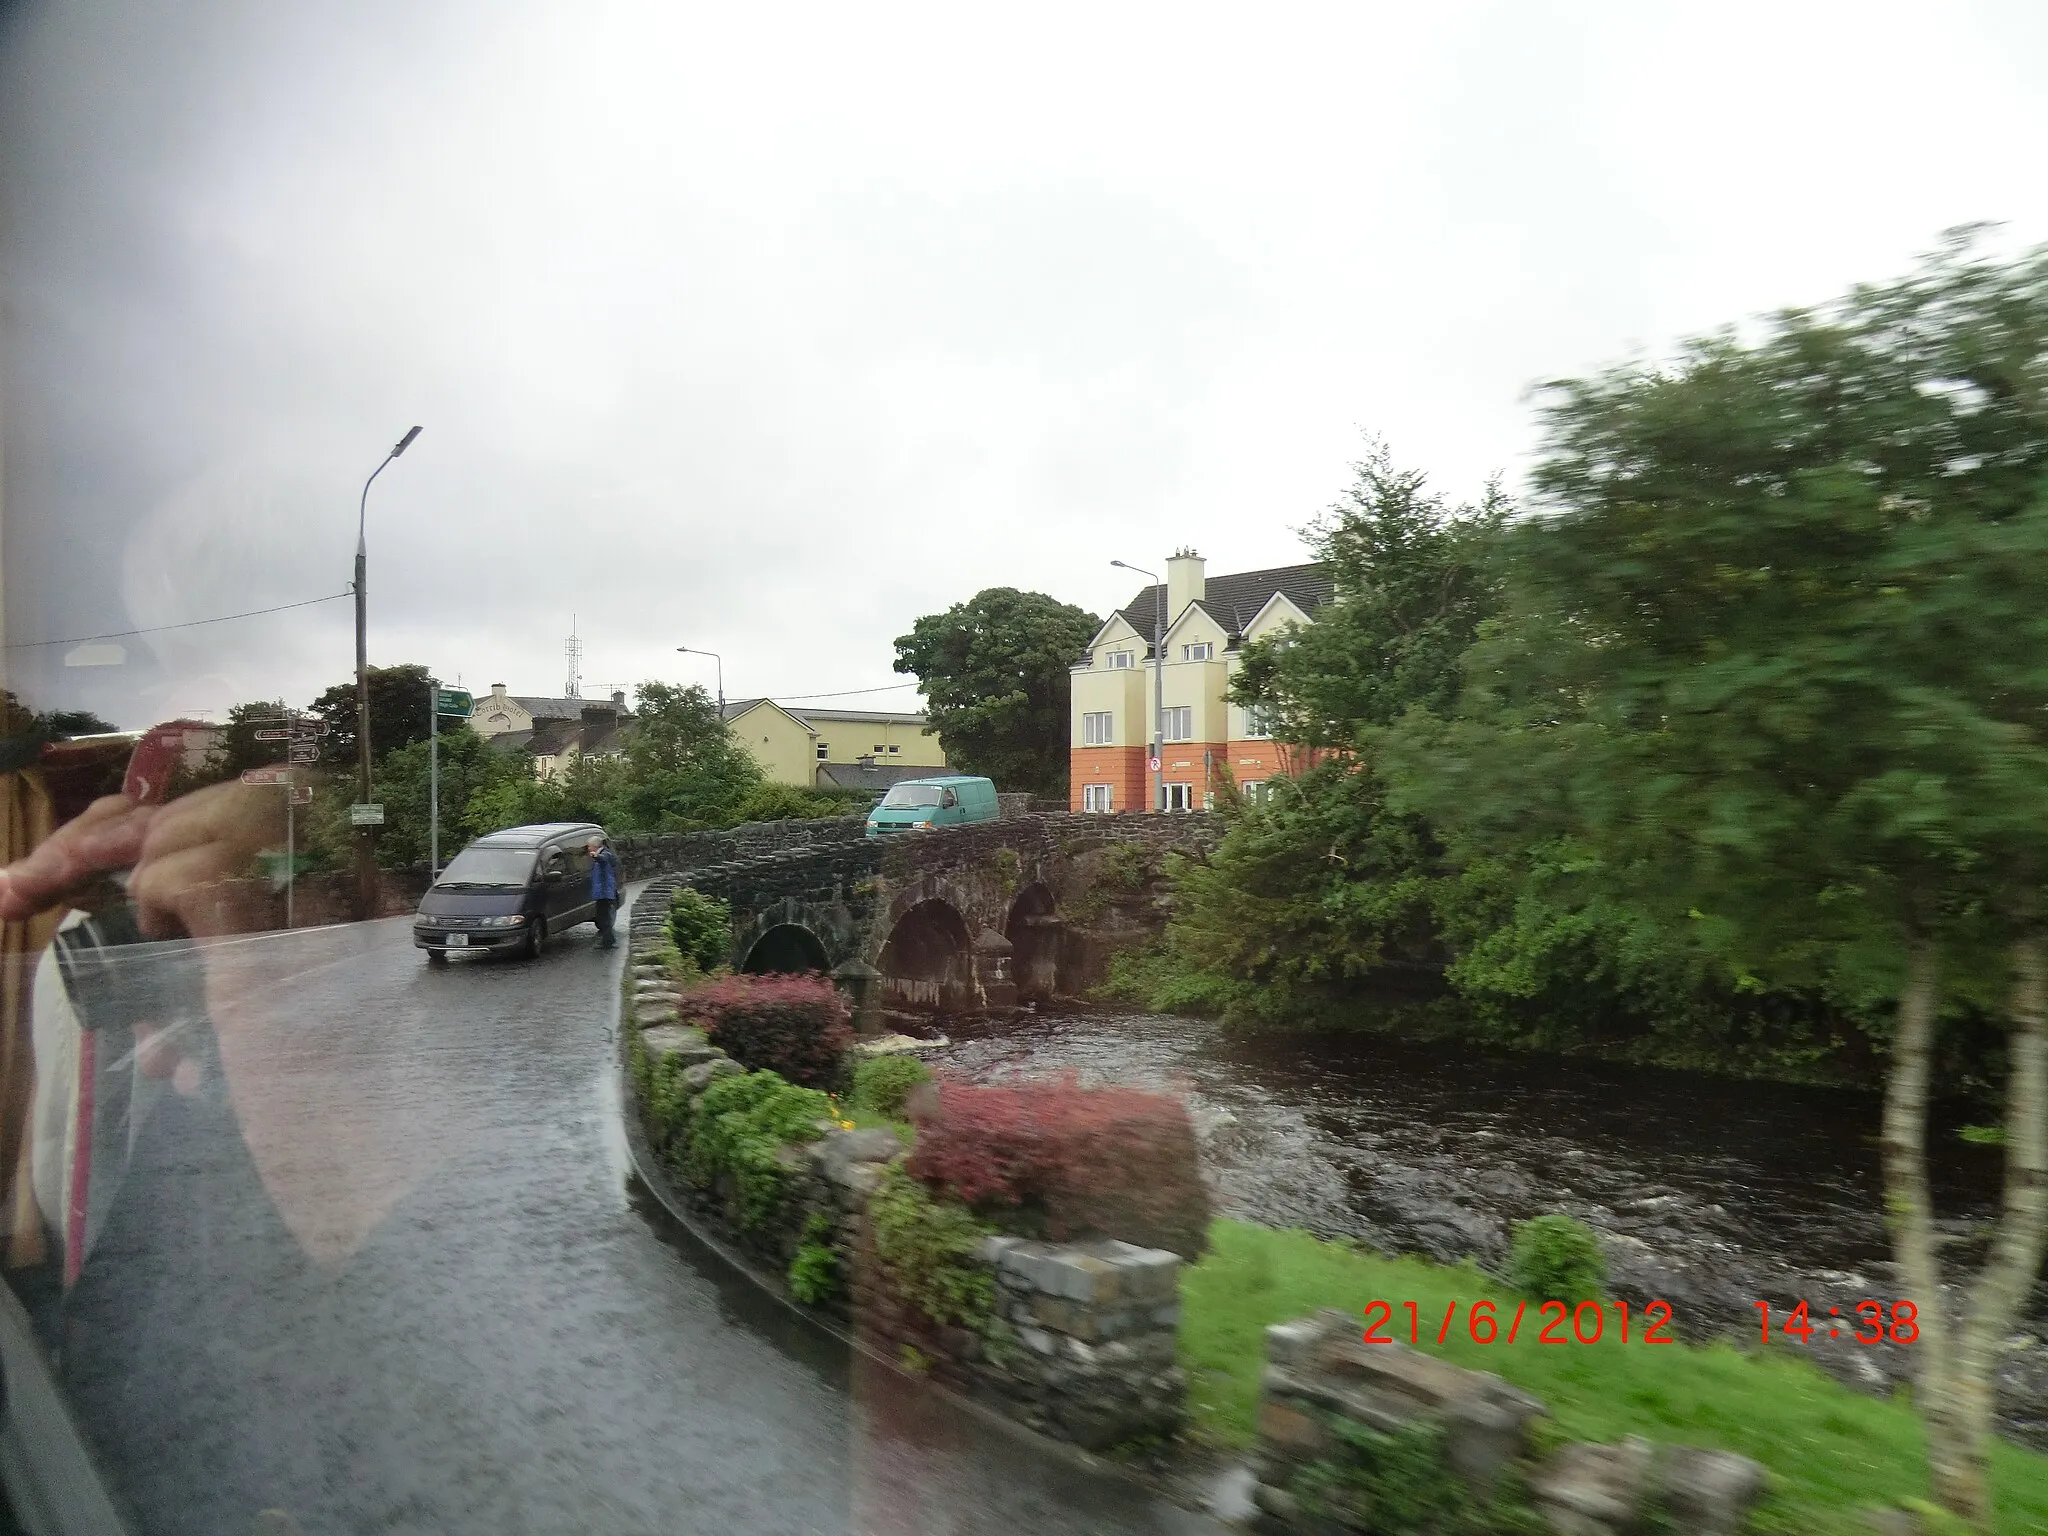 Photo showing: Bridge over fast flowing river in Oughterard